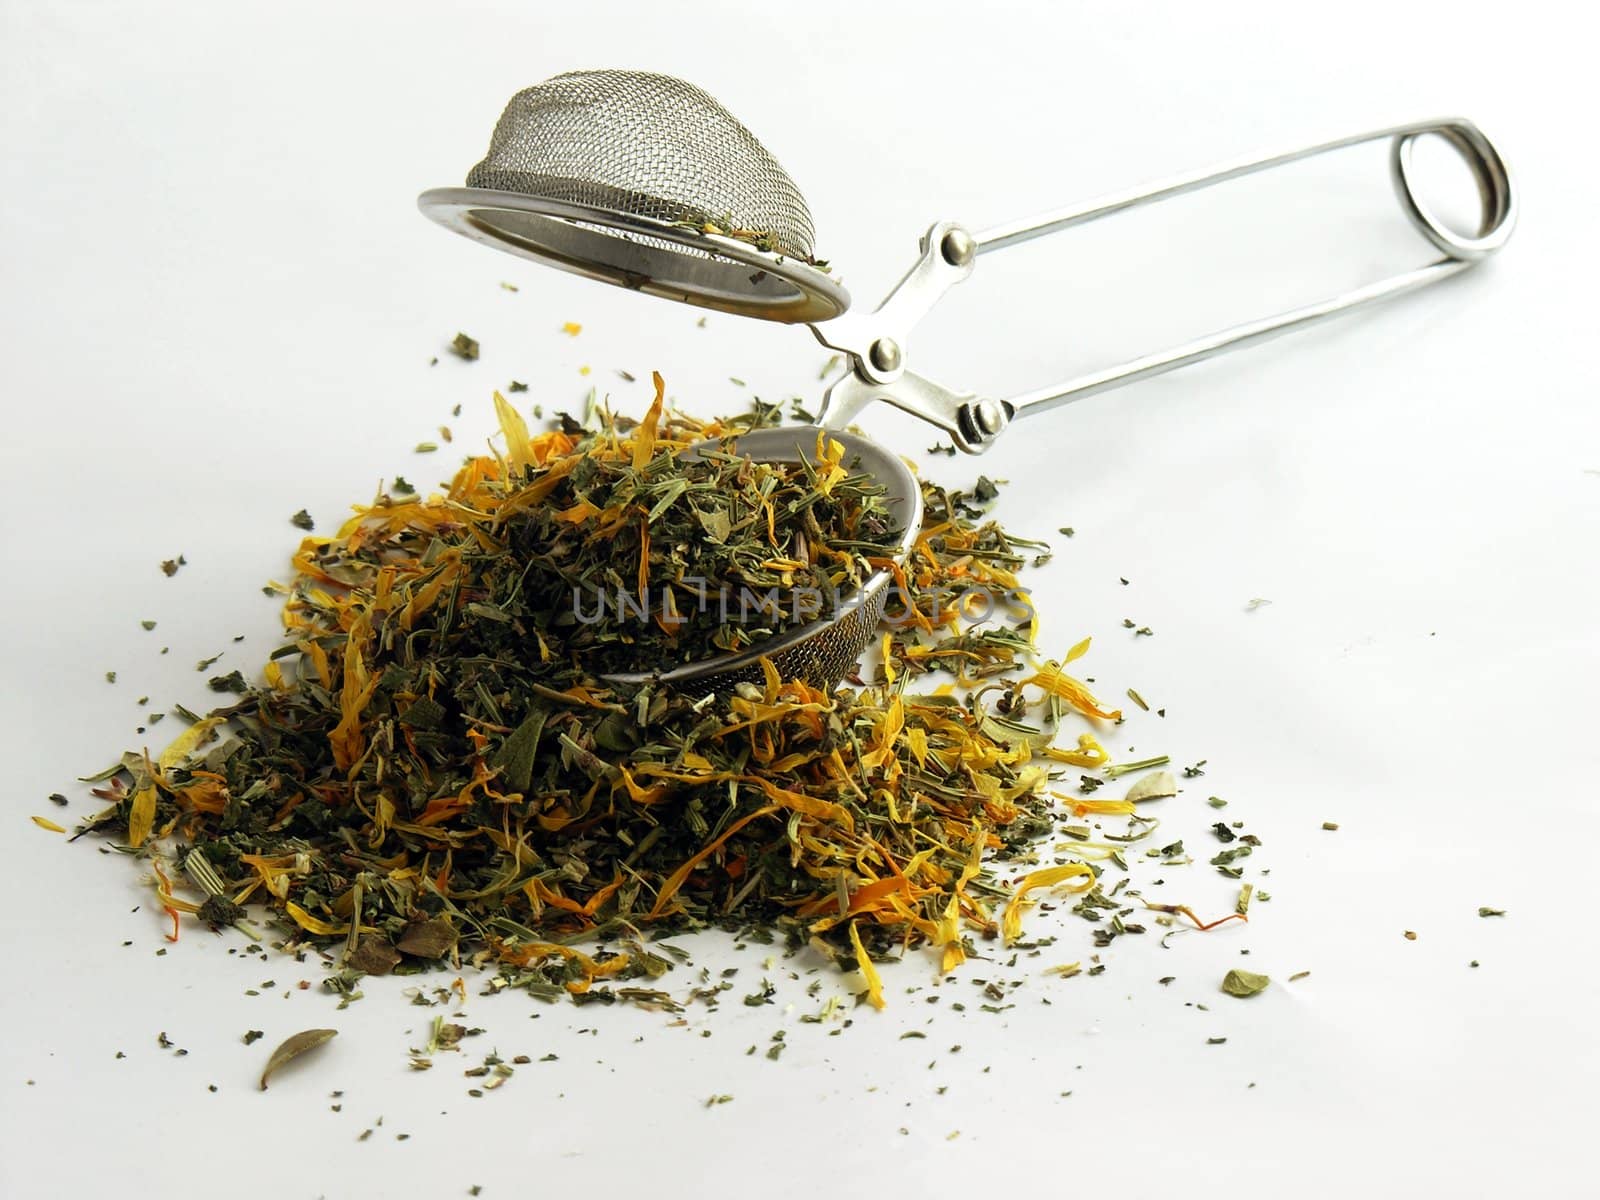 special spoon for herb tea infusing by RAIMA